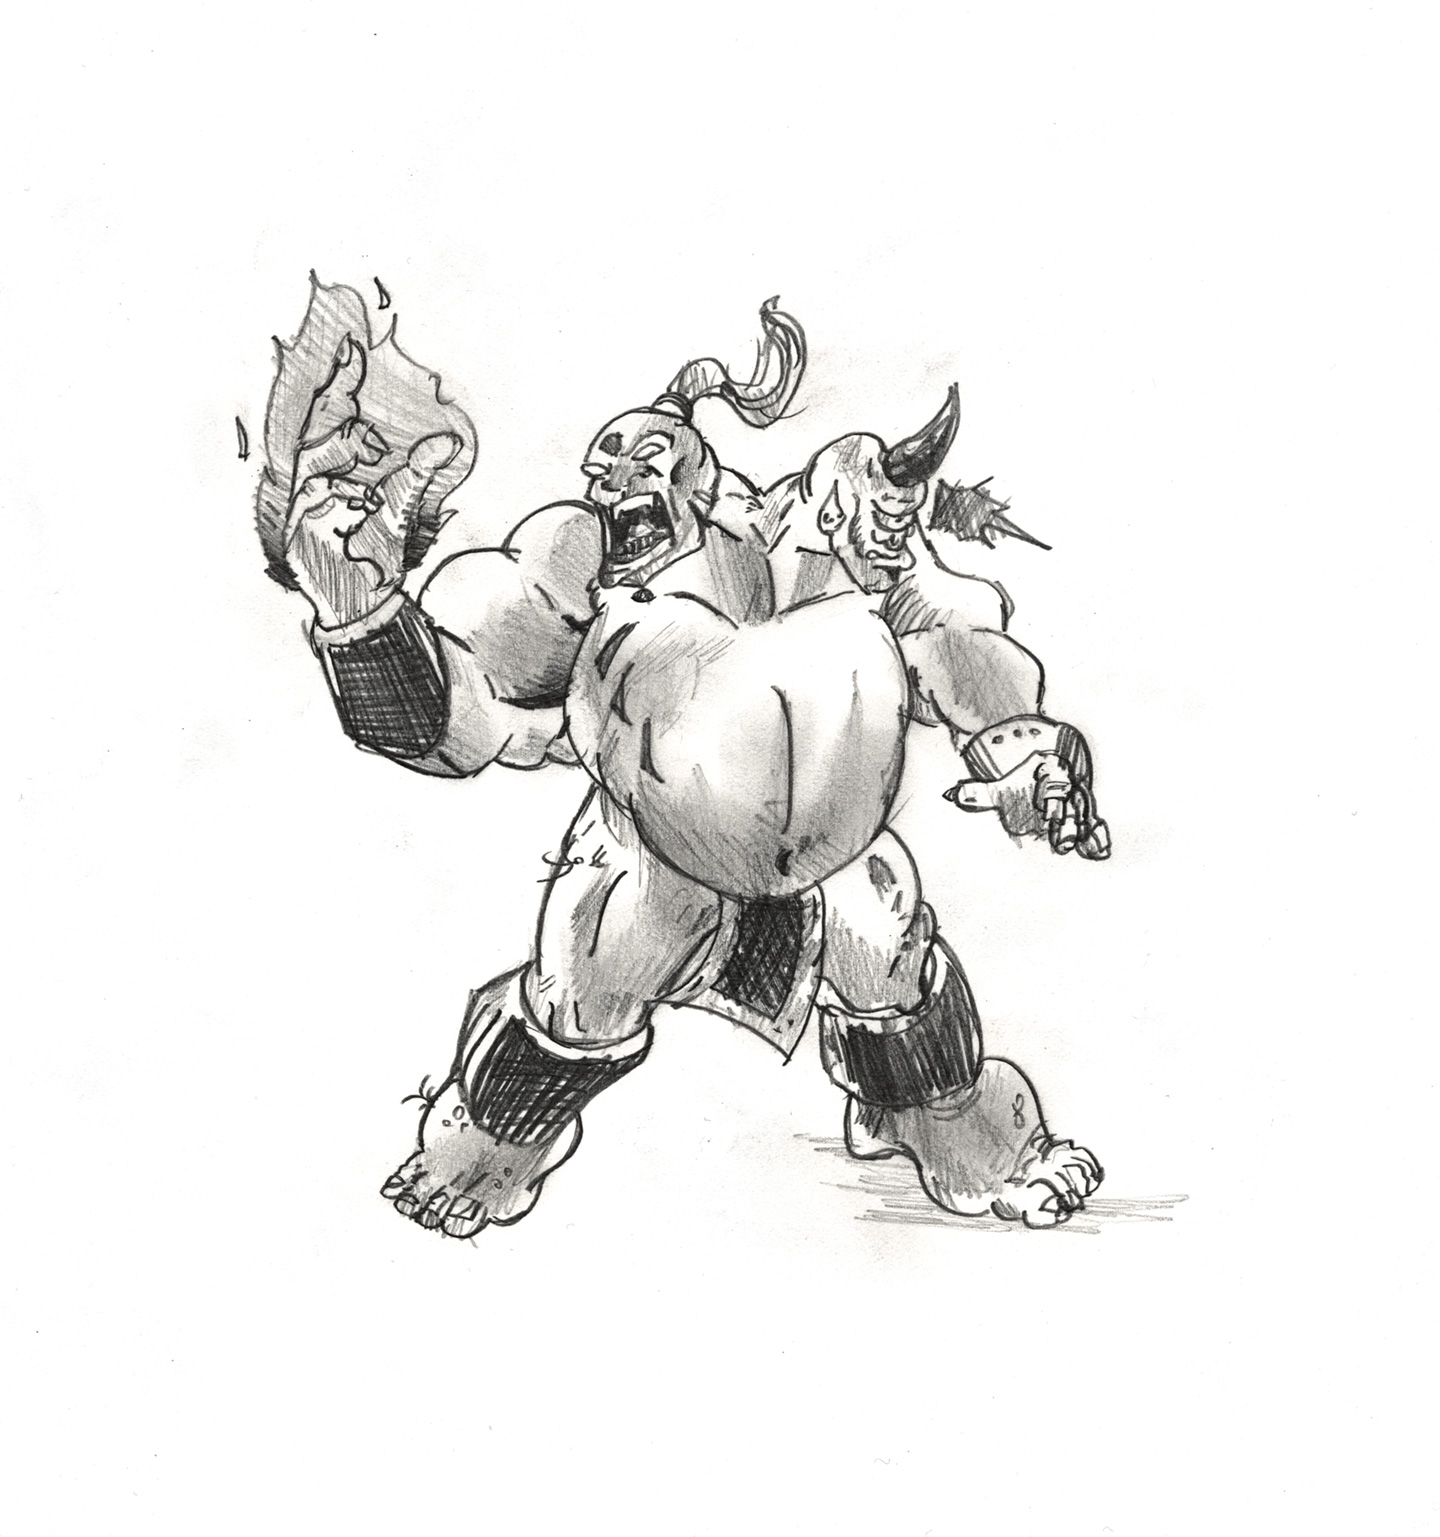 A drawing picturing a double-head big troll from Warcraft II